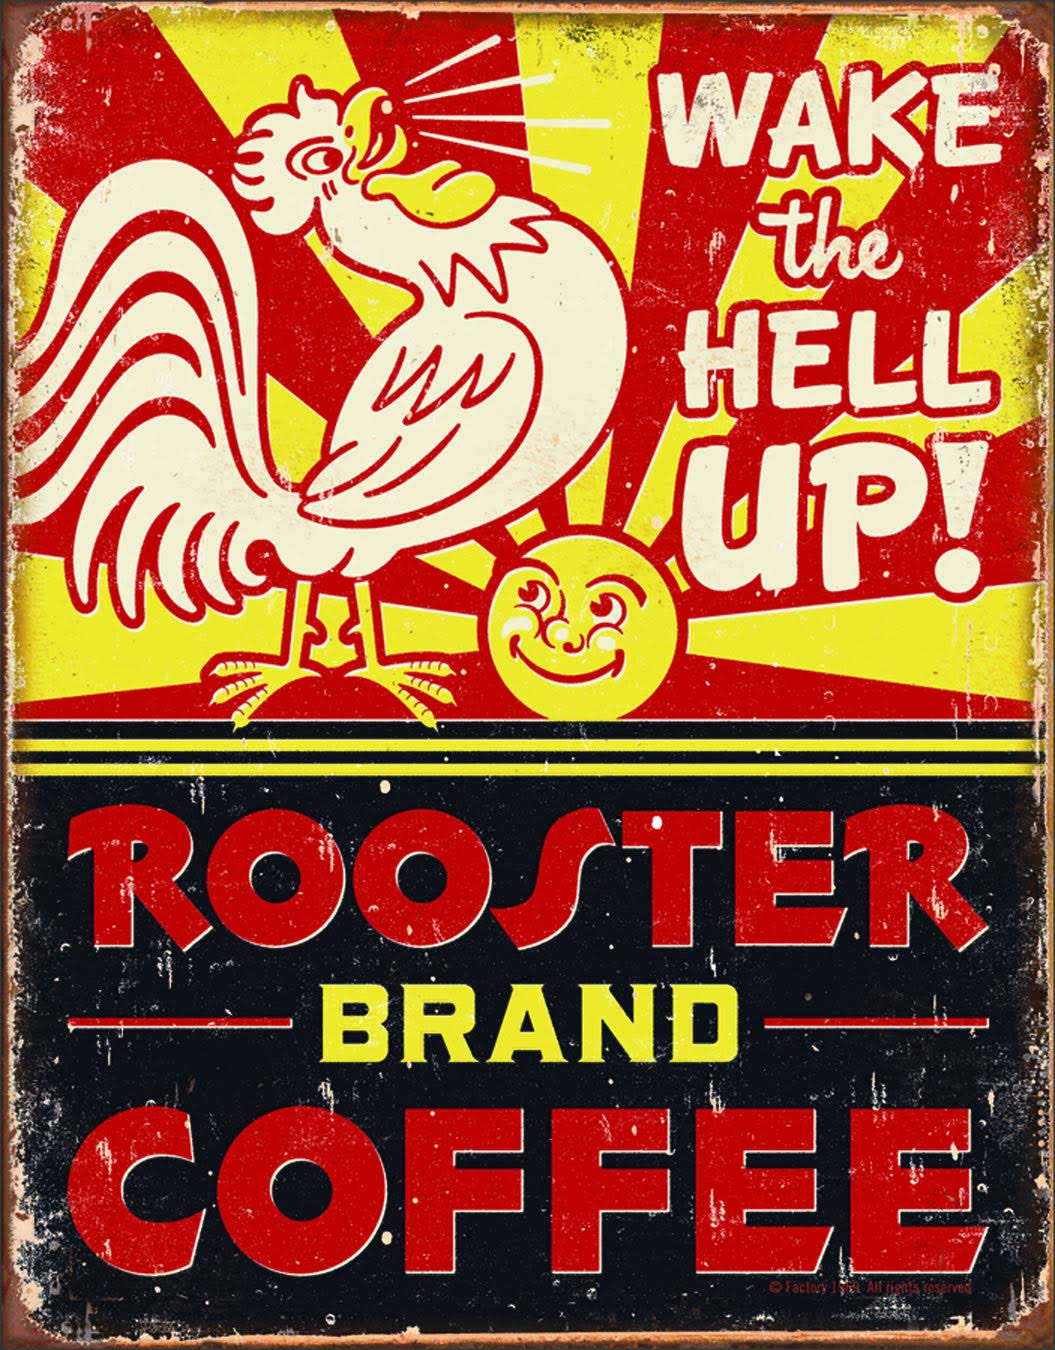 Rooster Brand Coffee Distressed Tin Sign 13 x 16in